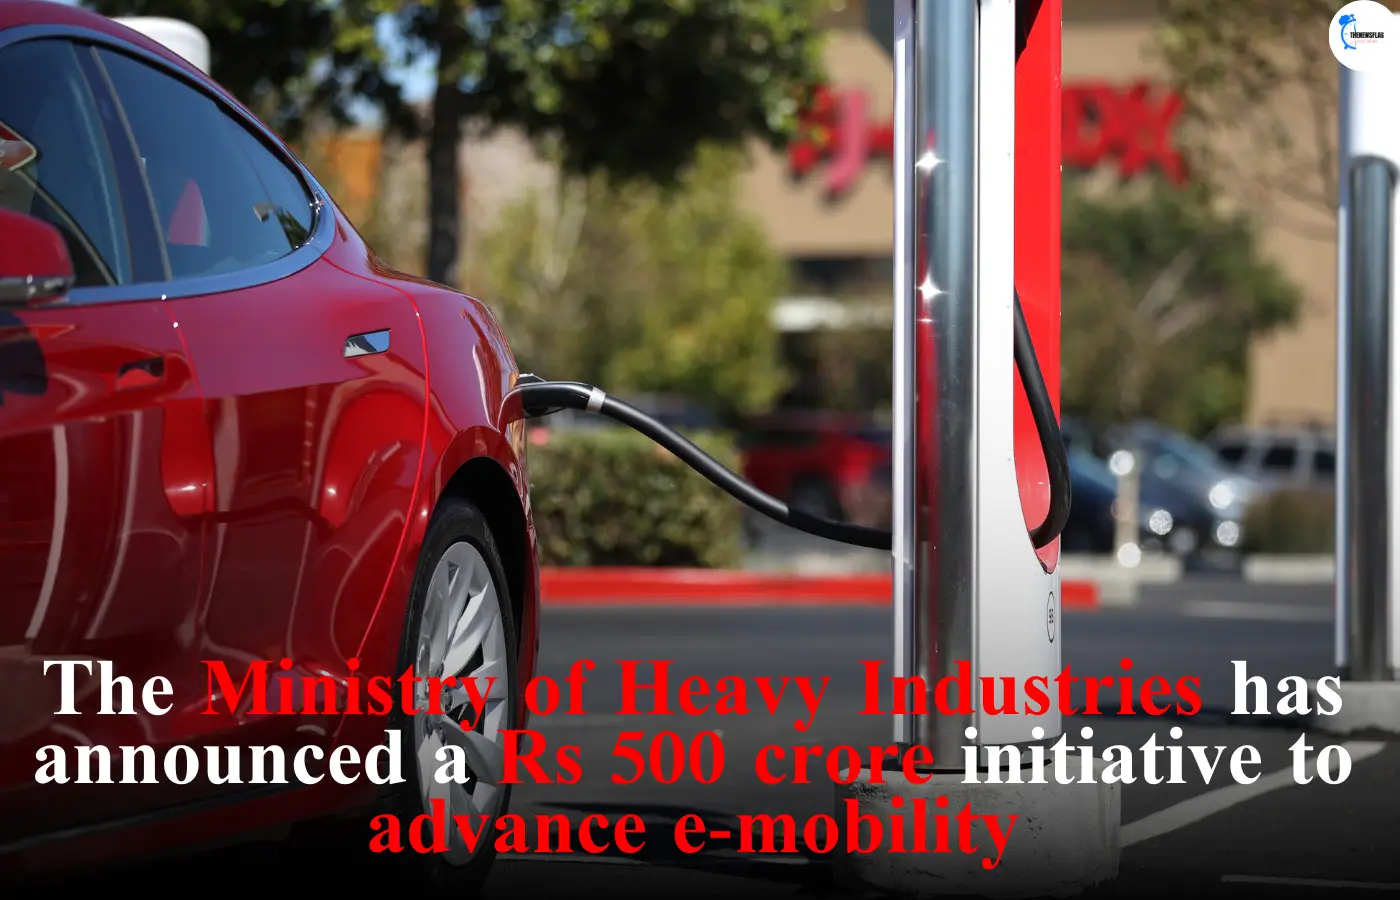 The Ministry of Heavy Industries has announced a Rs 500 crore initiative to advance e-mobility